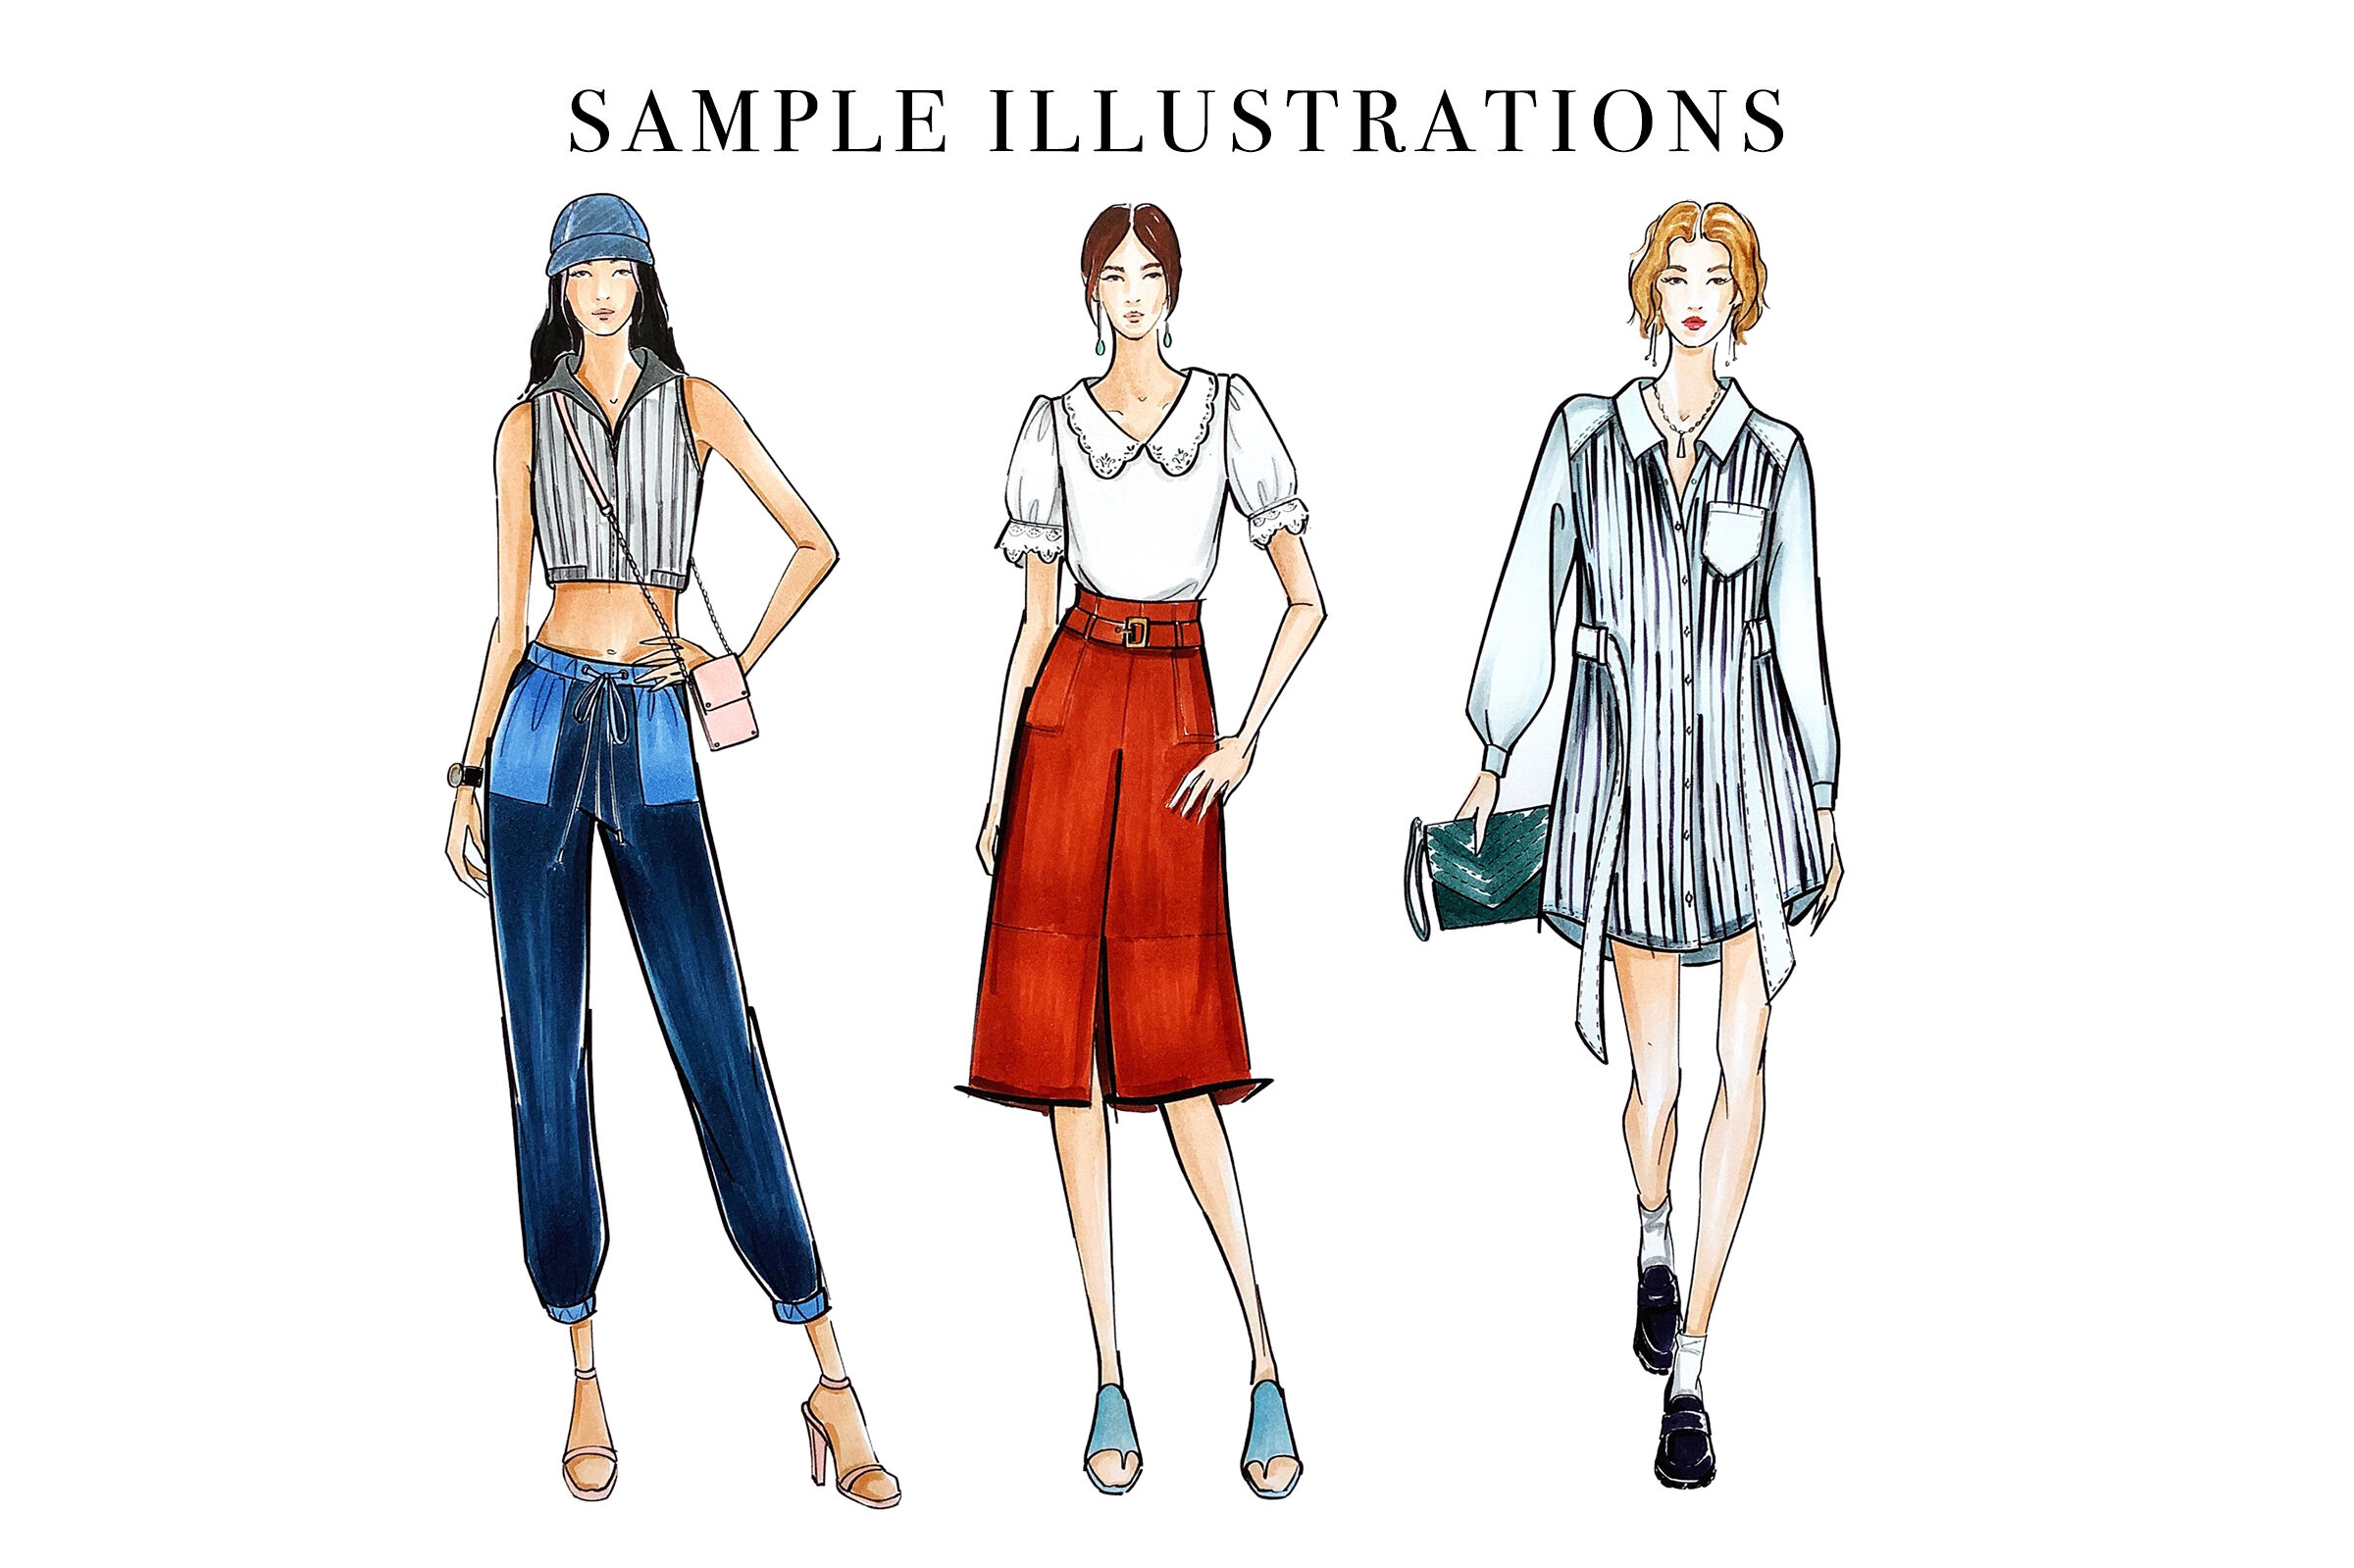 Sketch Fashion Illustration On A White Background Woman In Summer Outfits  Crop Tops And Sarong Skirt Stock Illustration - Download Image Now - iStock